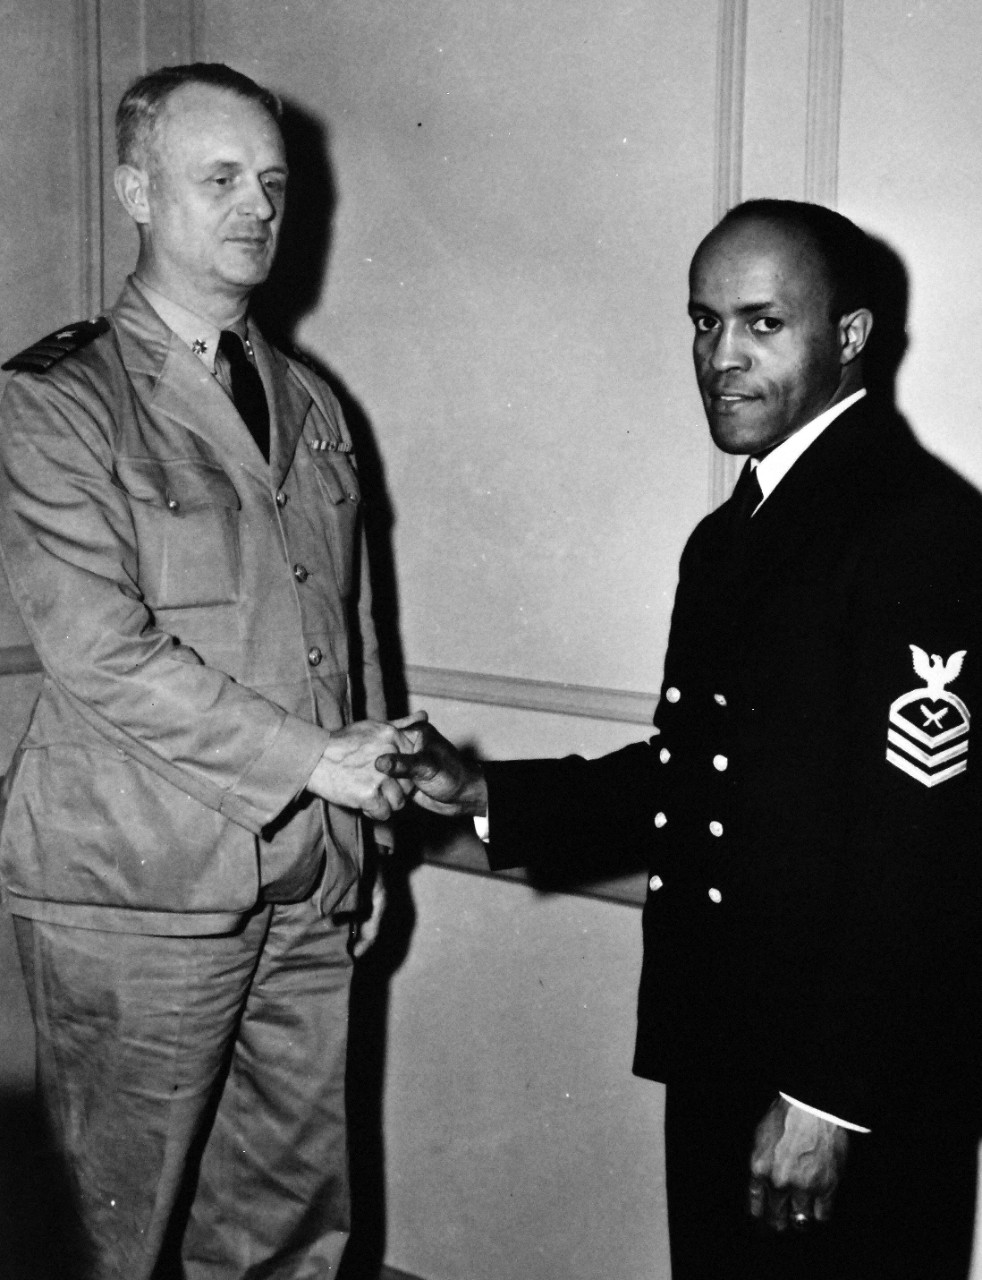 80-CF-882-4_Box 175:   Chief Yeoman F.L. Walker, 1942-1943.  African-American enters Navy as Chief Specialist.  Commander B.B. Ralston, USN (Ret.), Inspector of Naval Recruiting, Northeastern Division, congratulates Chief Yeoman F.L. Walker, USNR, 1942-19843.   Official U.S. Navy photograph, now in the collections of the National Archives.